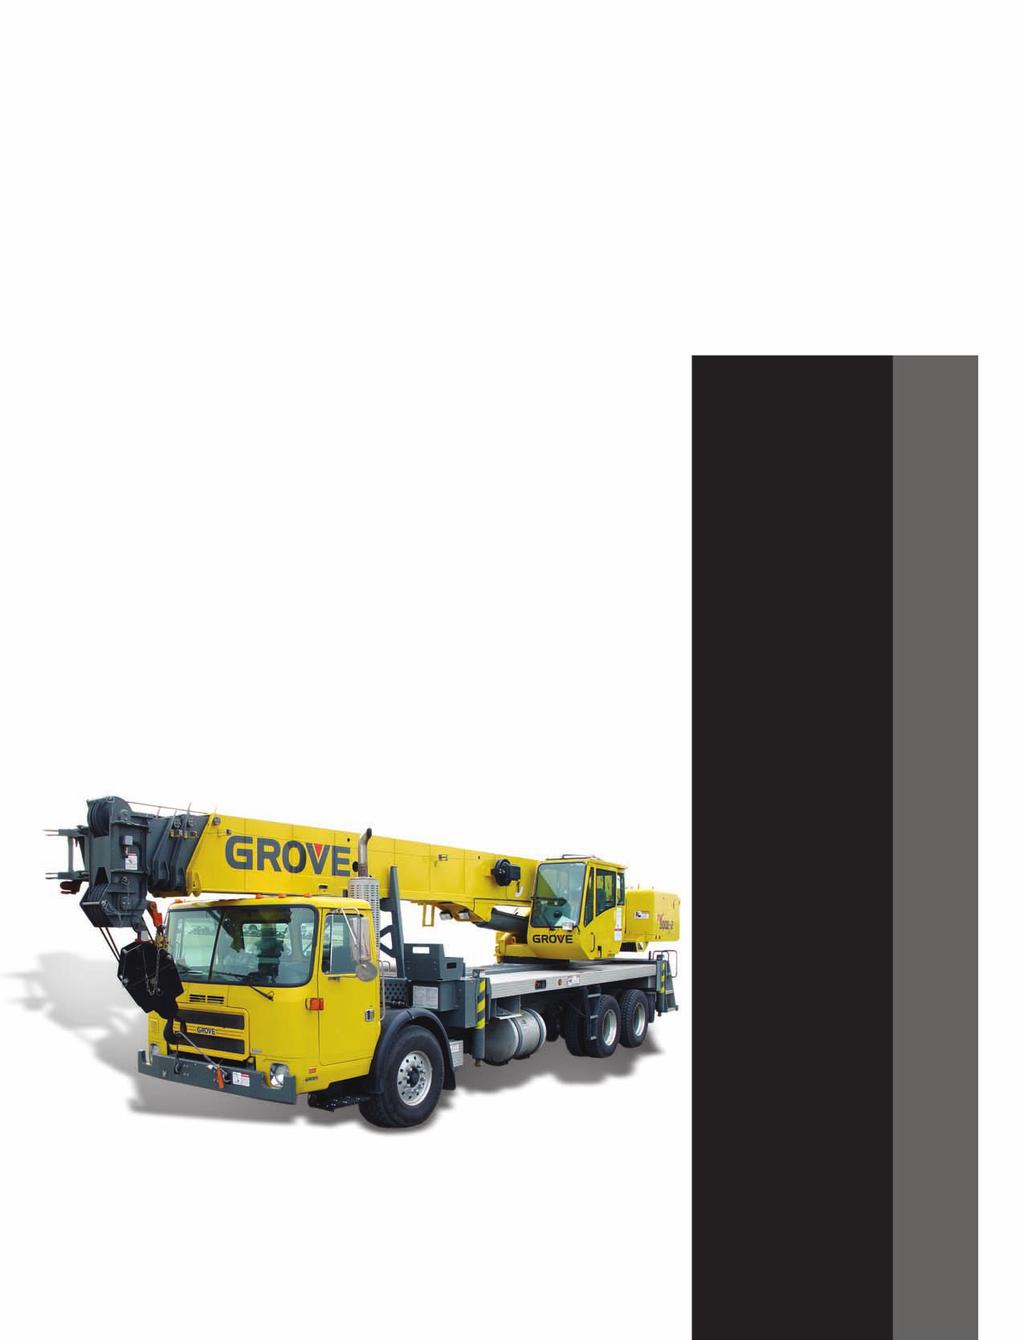 load handling product guide 1 features ton ( mt) Capacity 29 ft.-95 ft. (8.8-29 m) 4 section, full power boom 32 ft.-102 ft. (9.8-31 m) 4 section, full power boom 26 ft.- ft. (7.6-13.